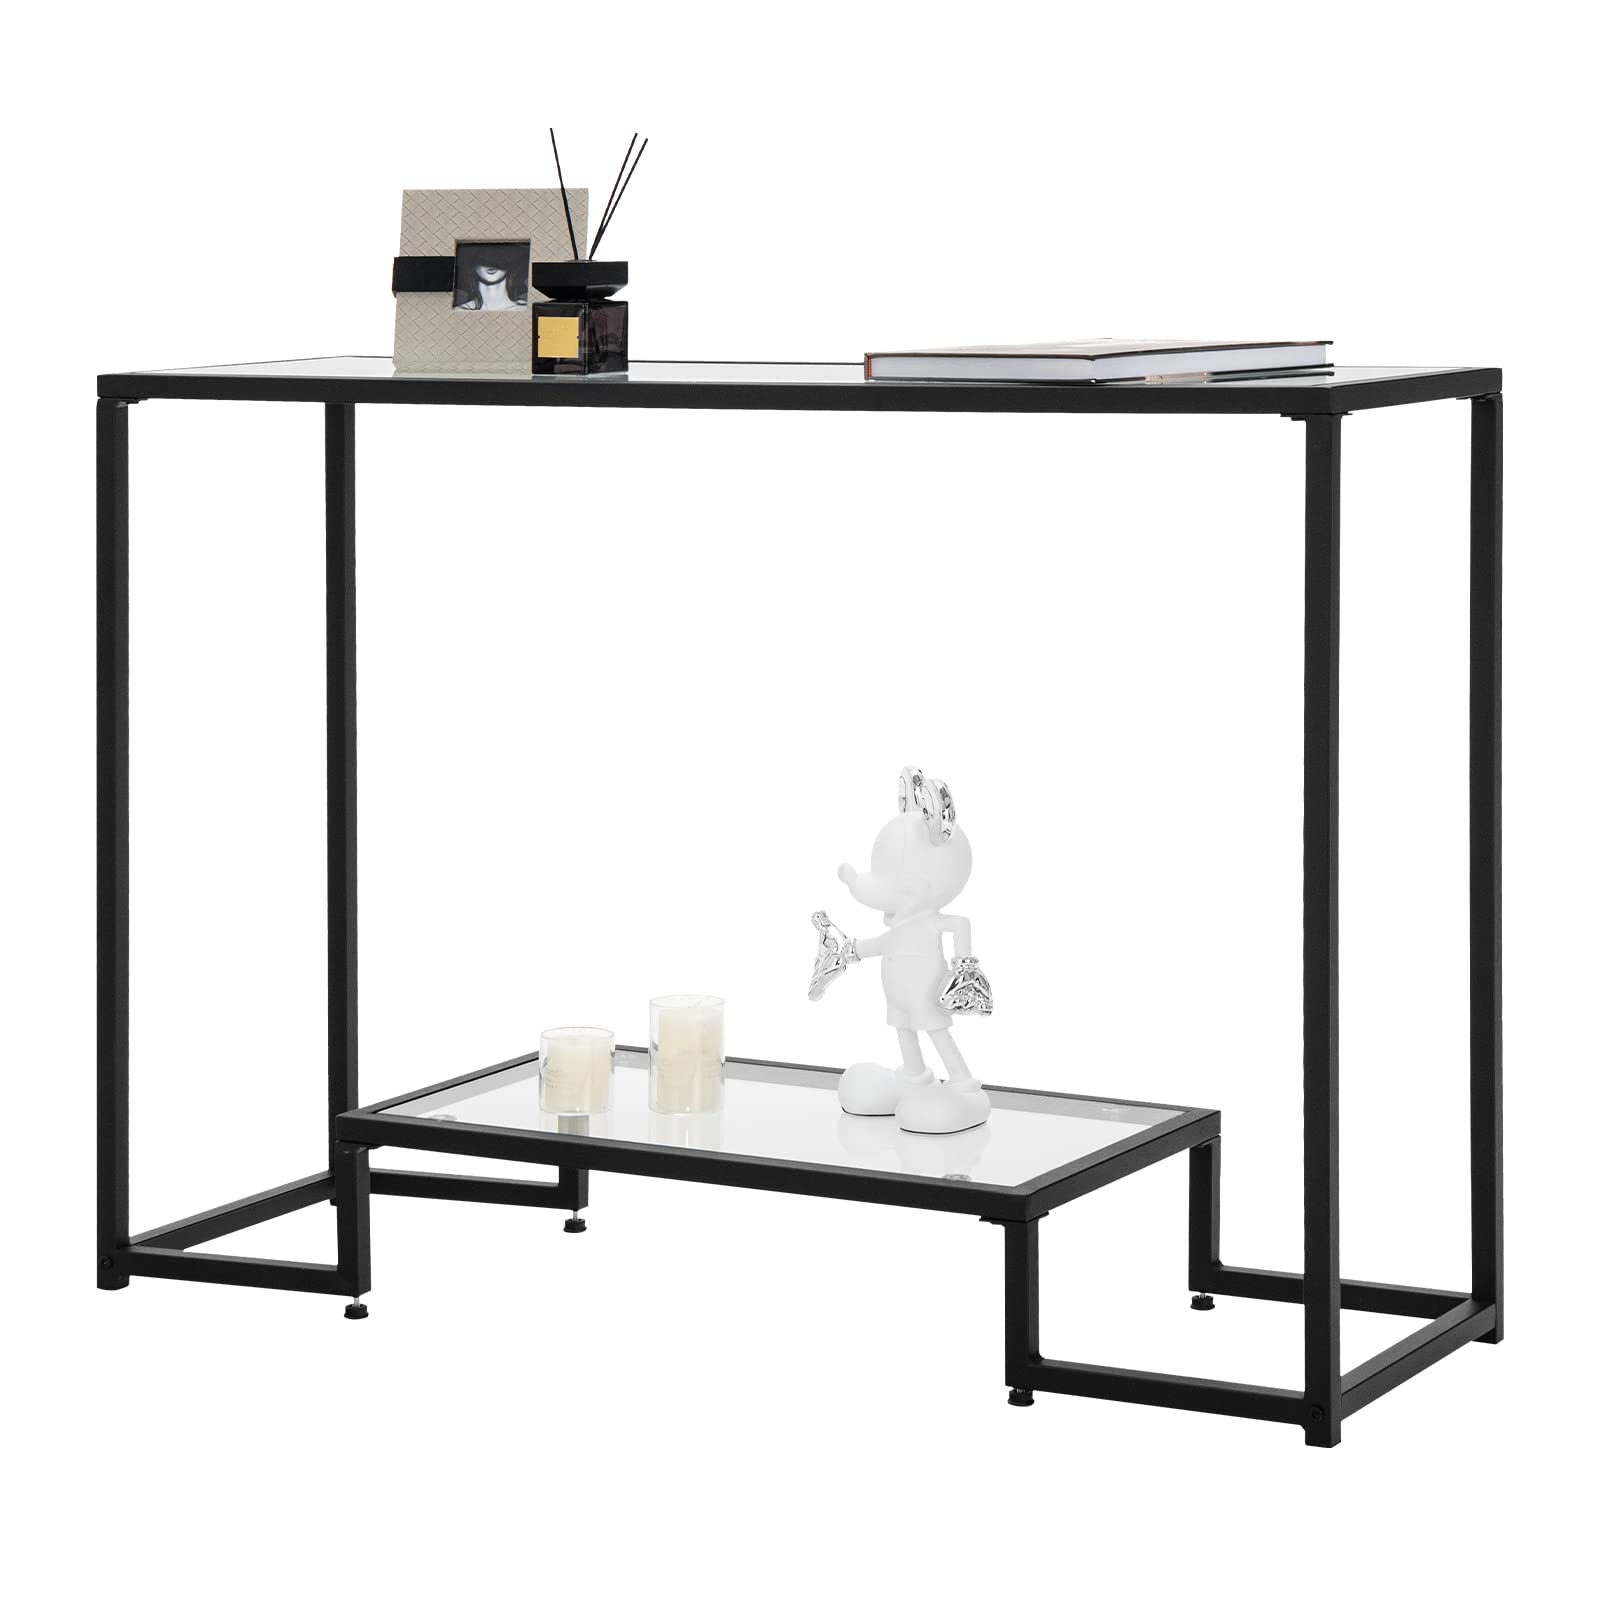 Giantex Narrow Console Entryway Table - Modern Sofa Side Table with Storage Lower Shelf, Black